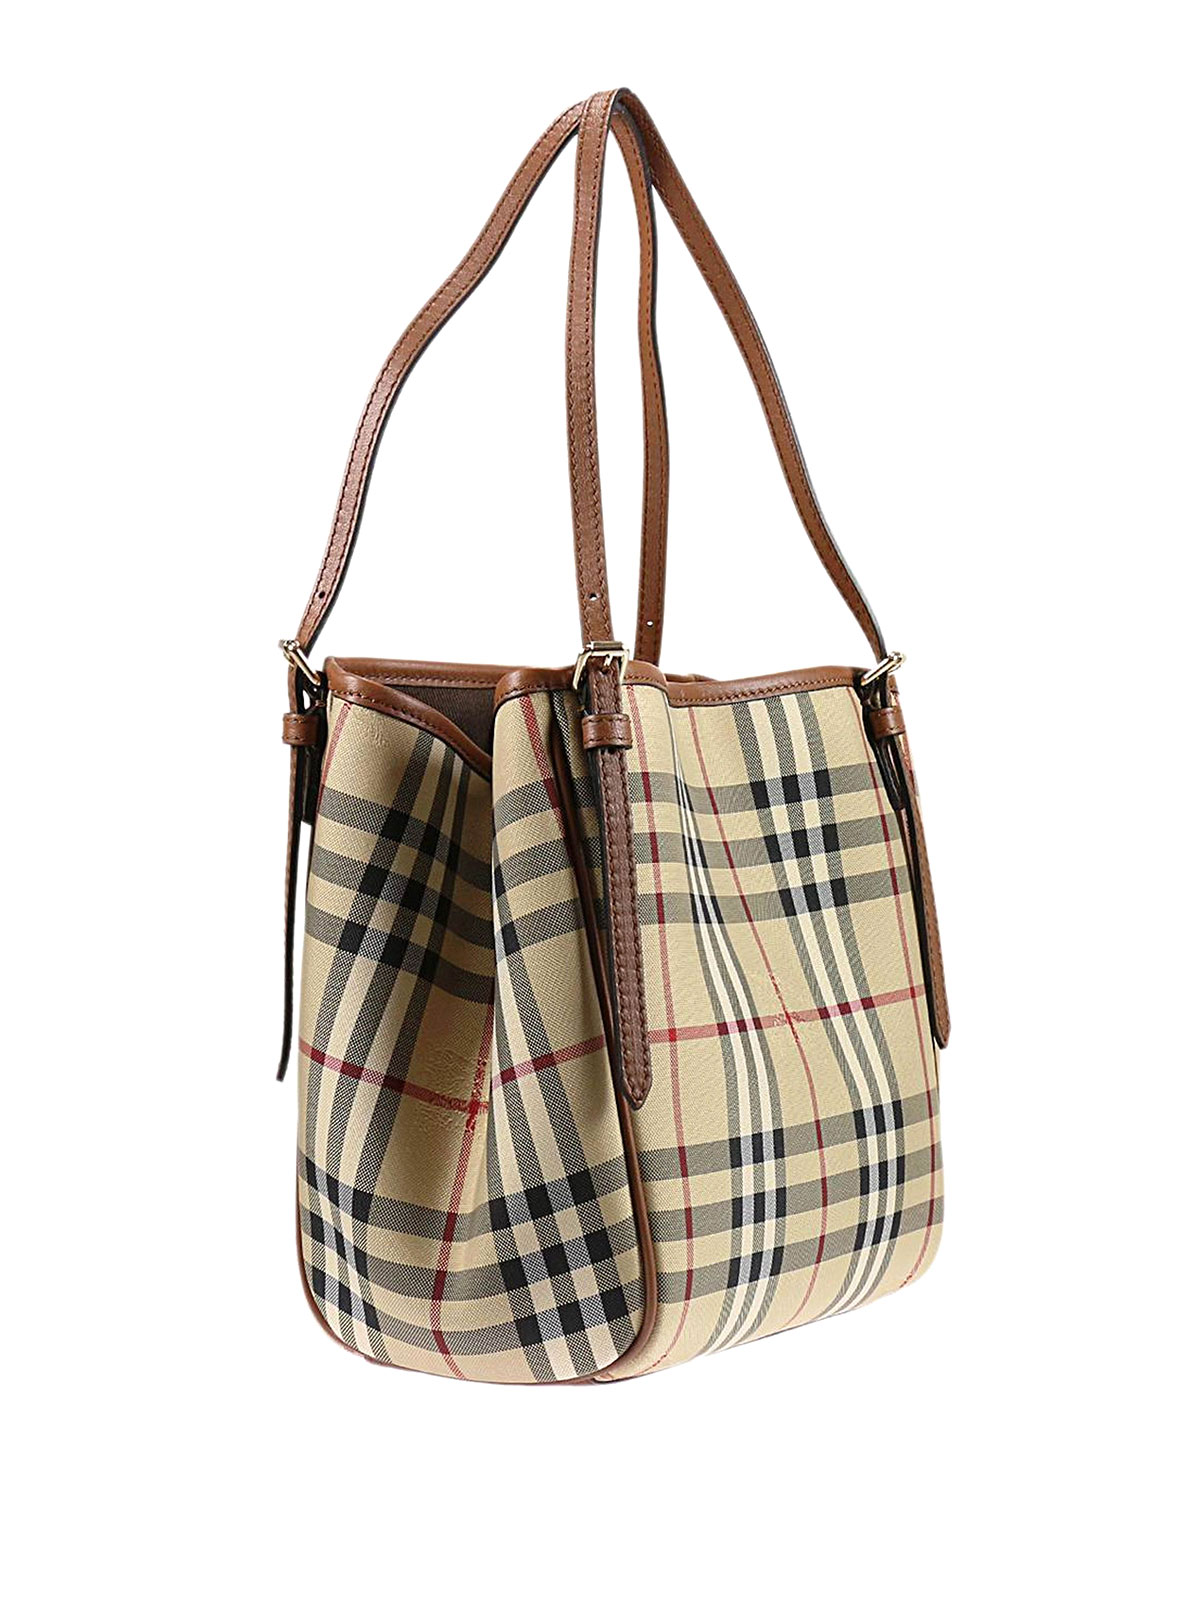 Totes bags Burberry - Mini Canter Horseferry check tote - 40223691